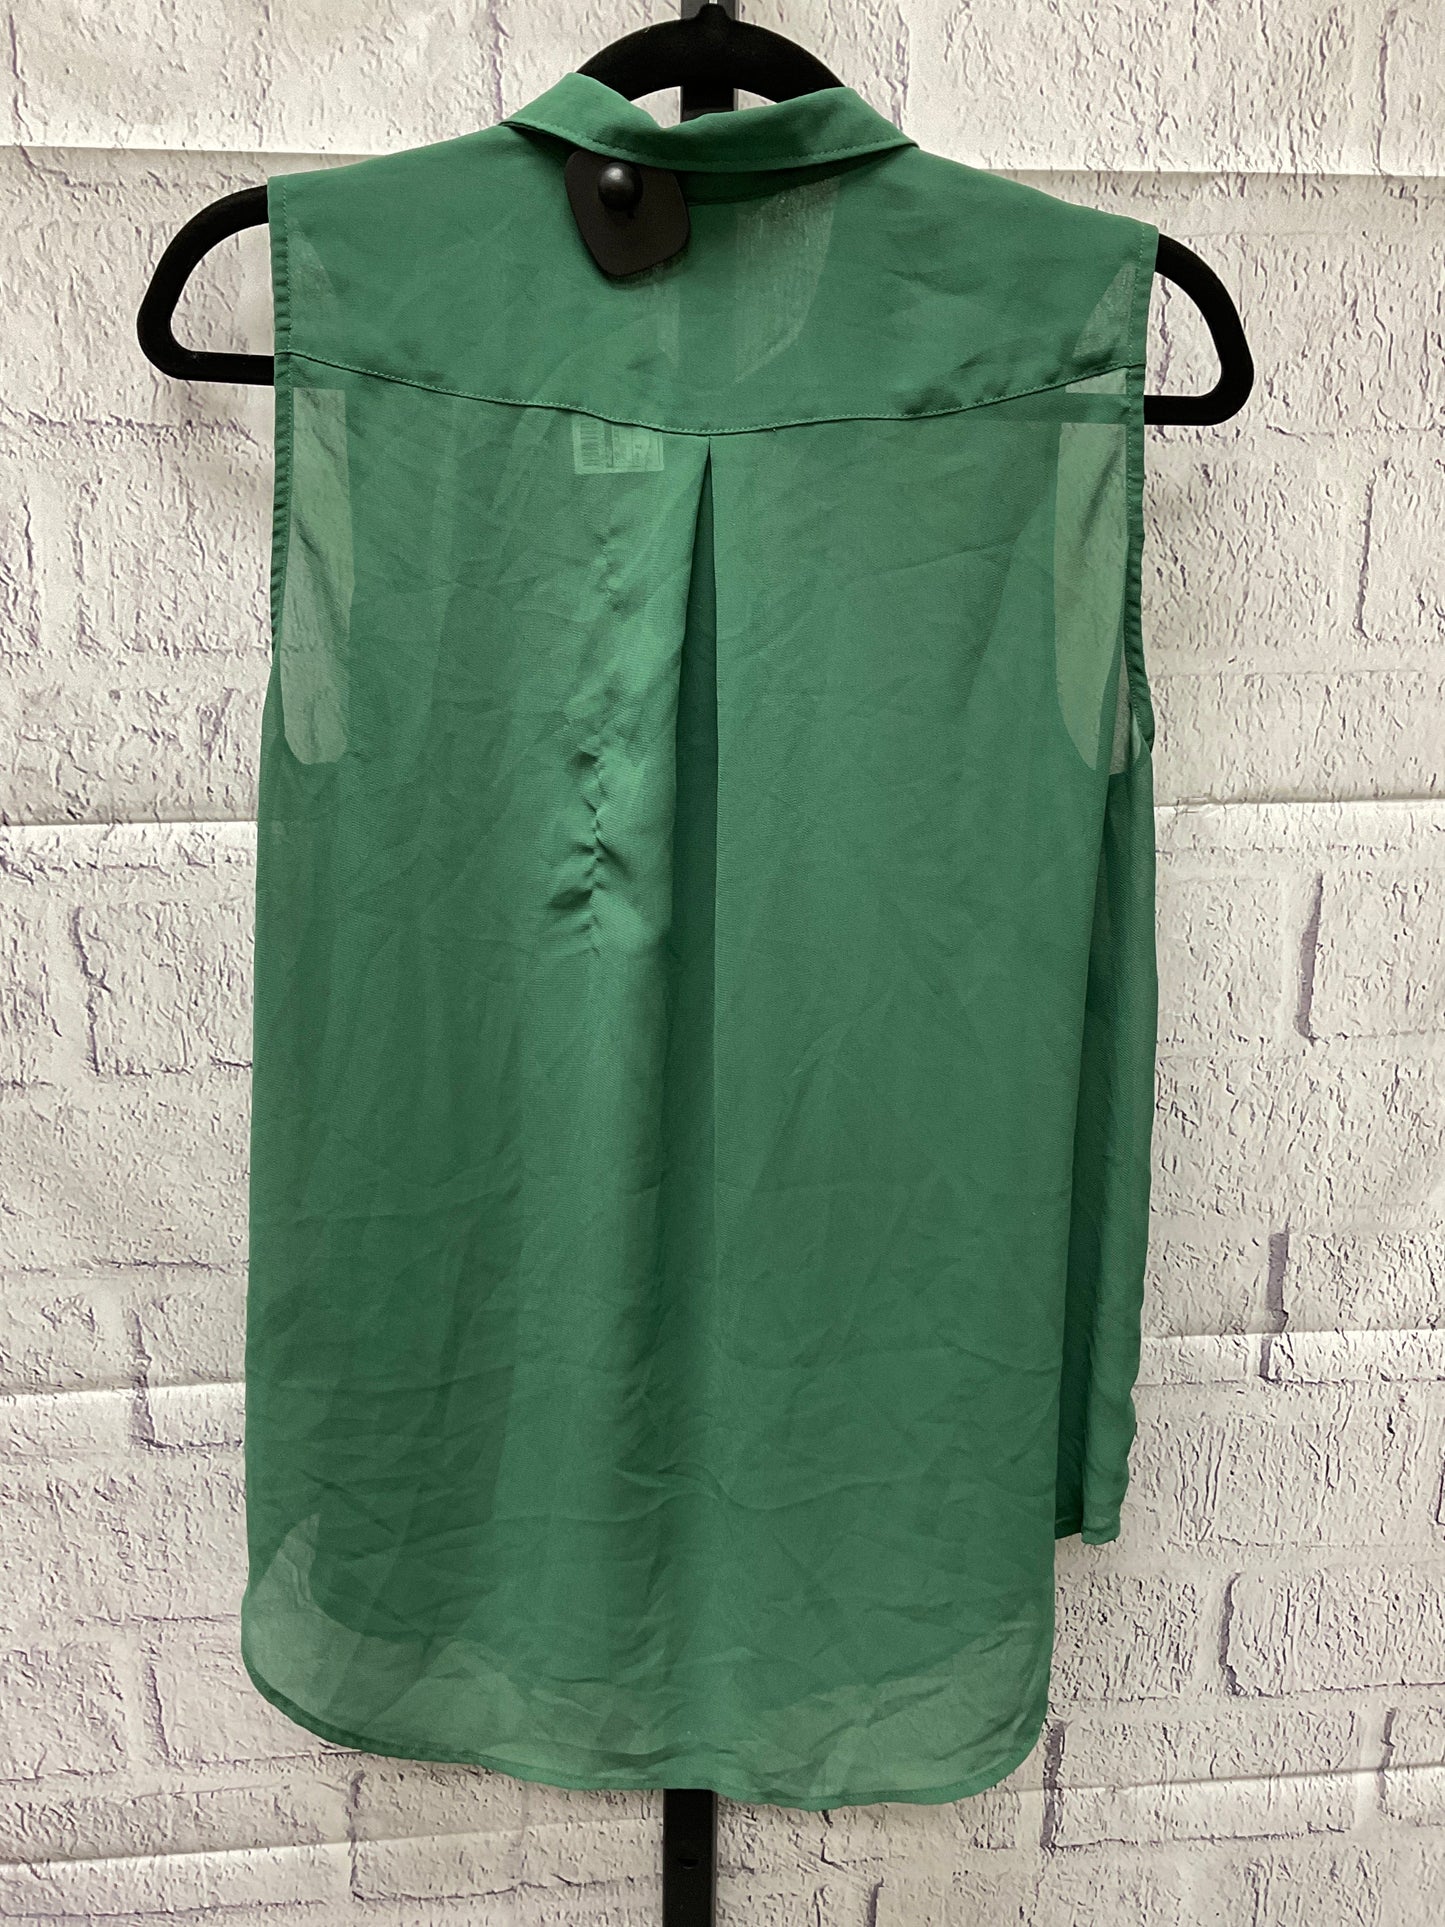 Top Sleeveless By H&m  Size: 6